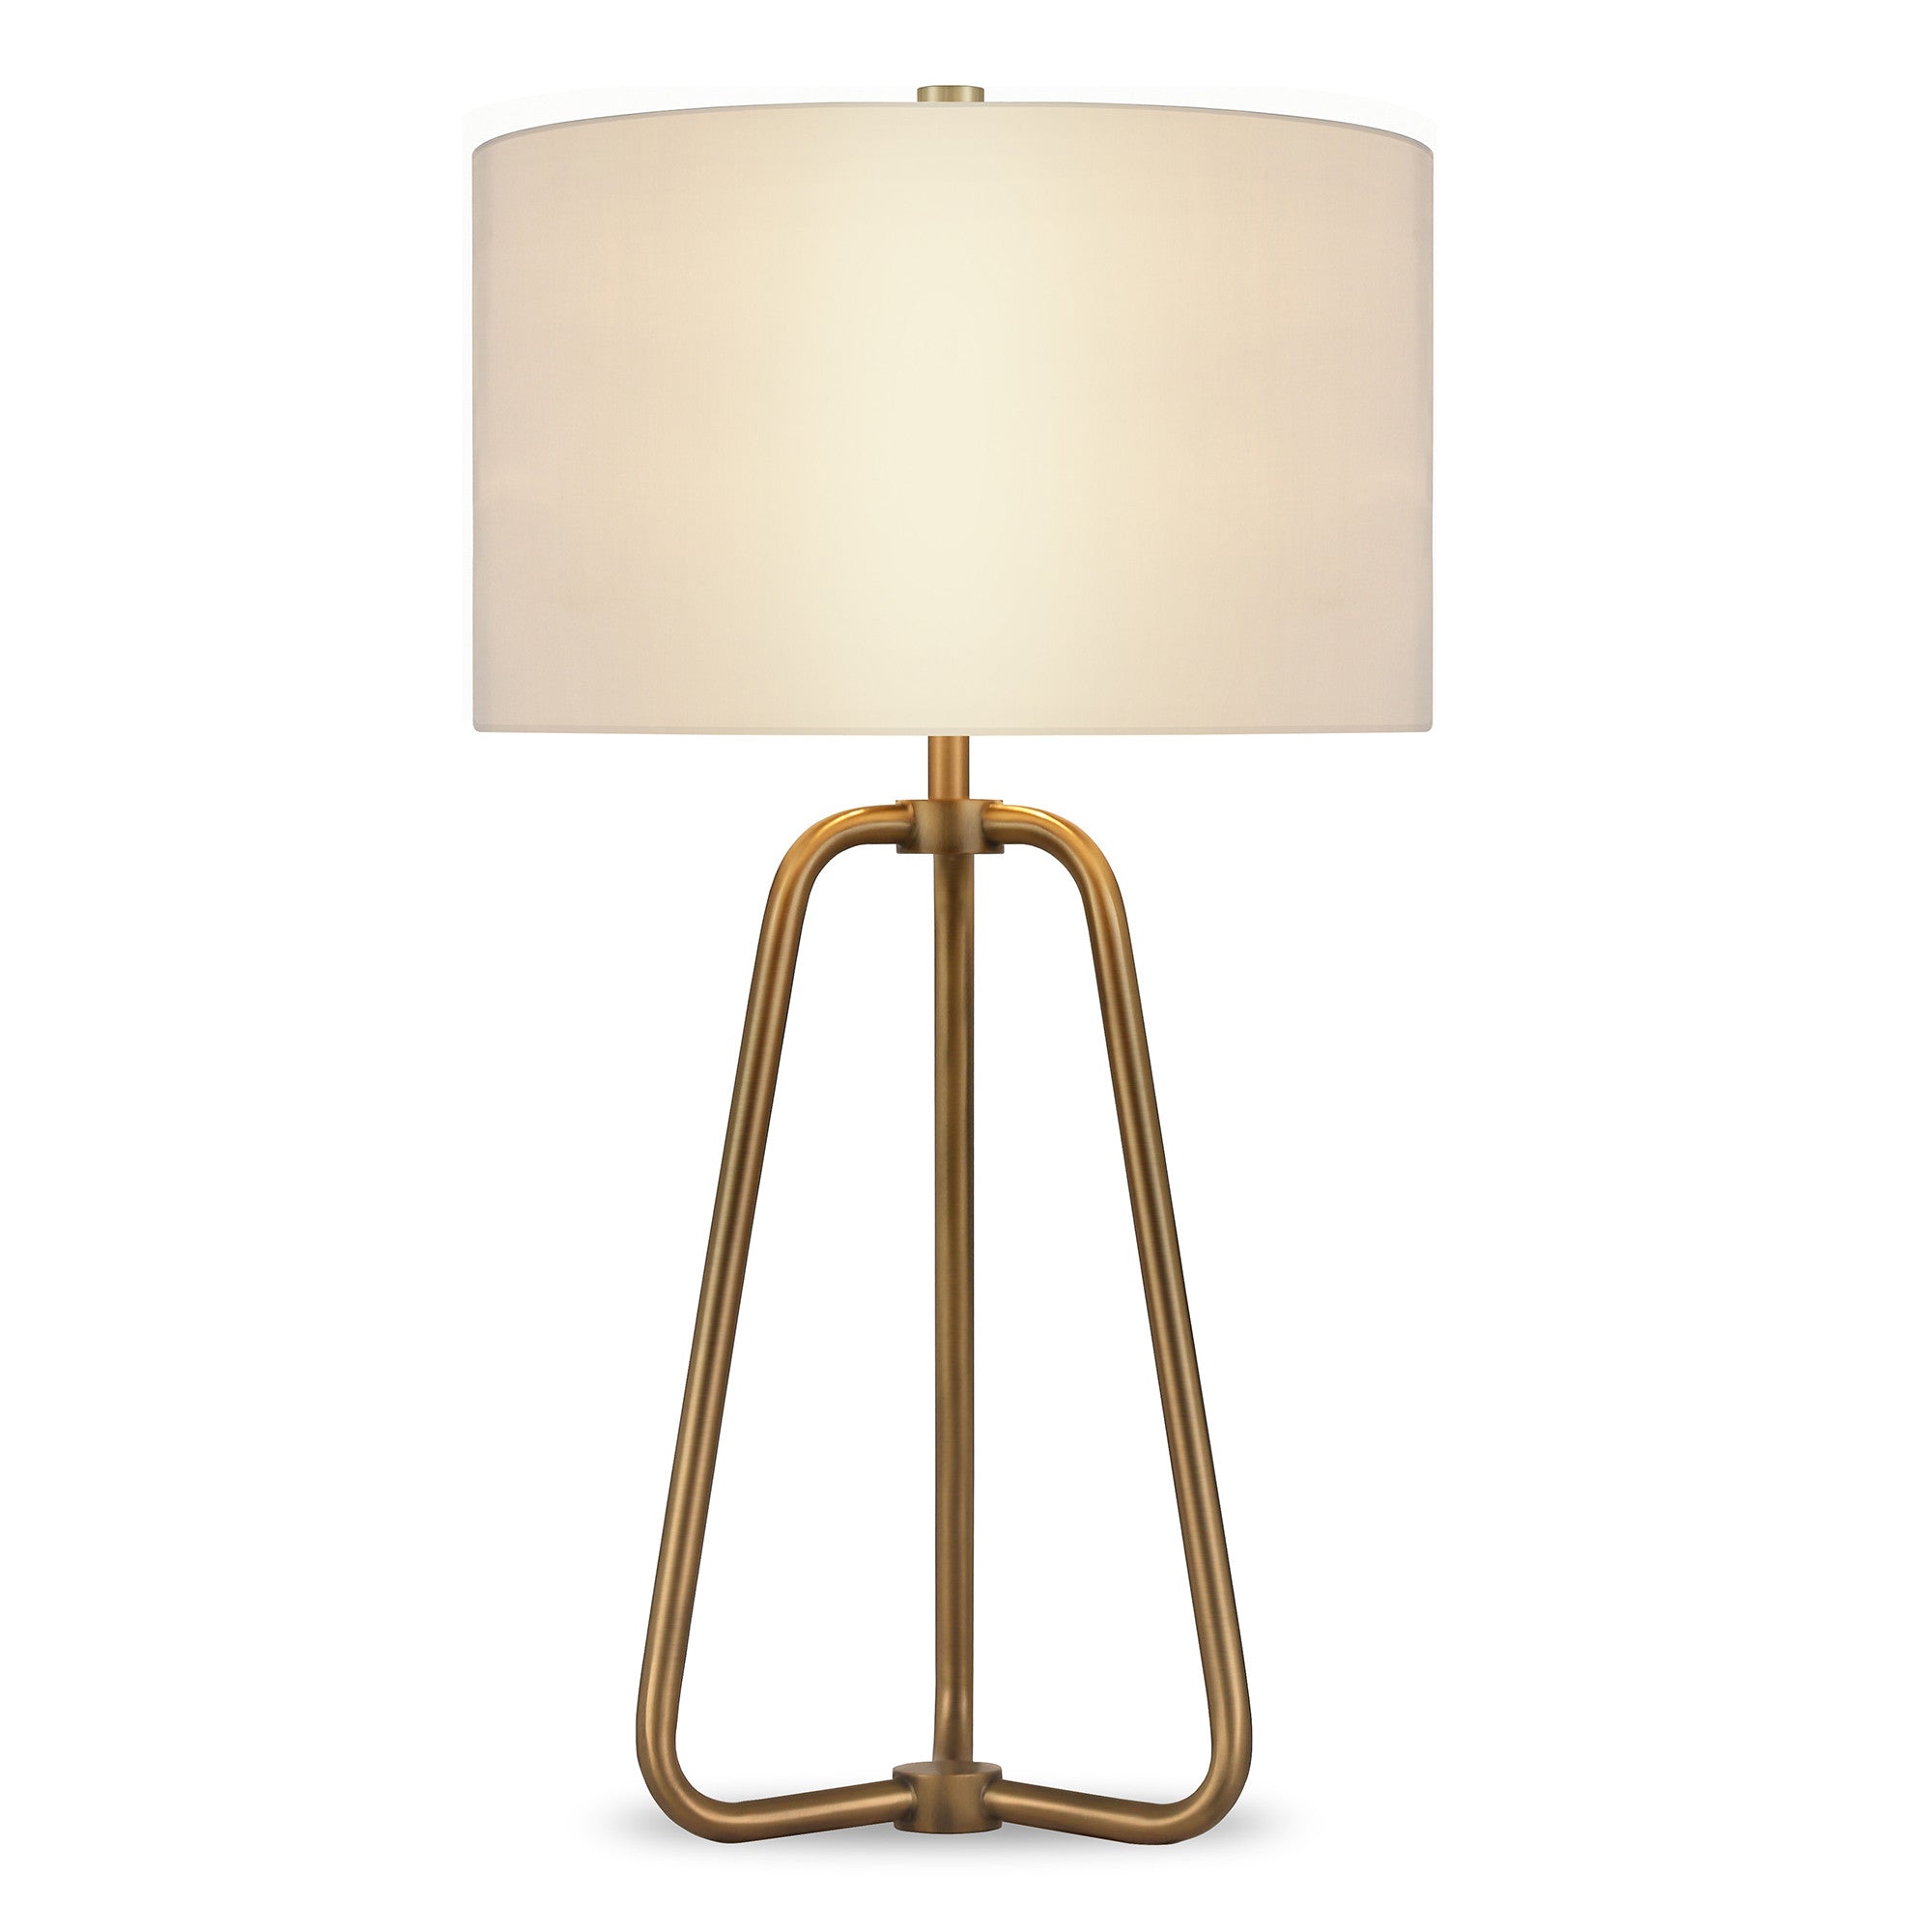 25" Brass Metal Table Lamp With White Drum Shade